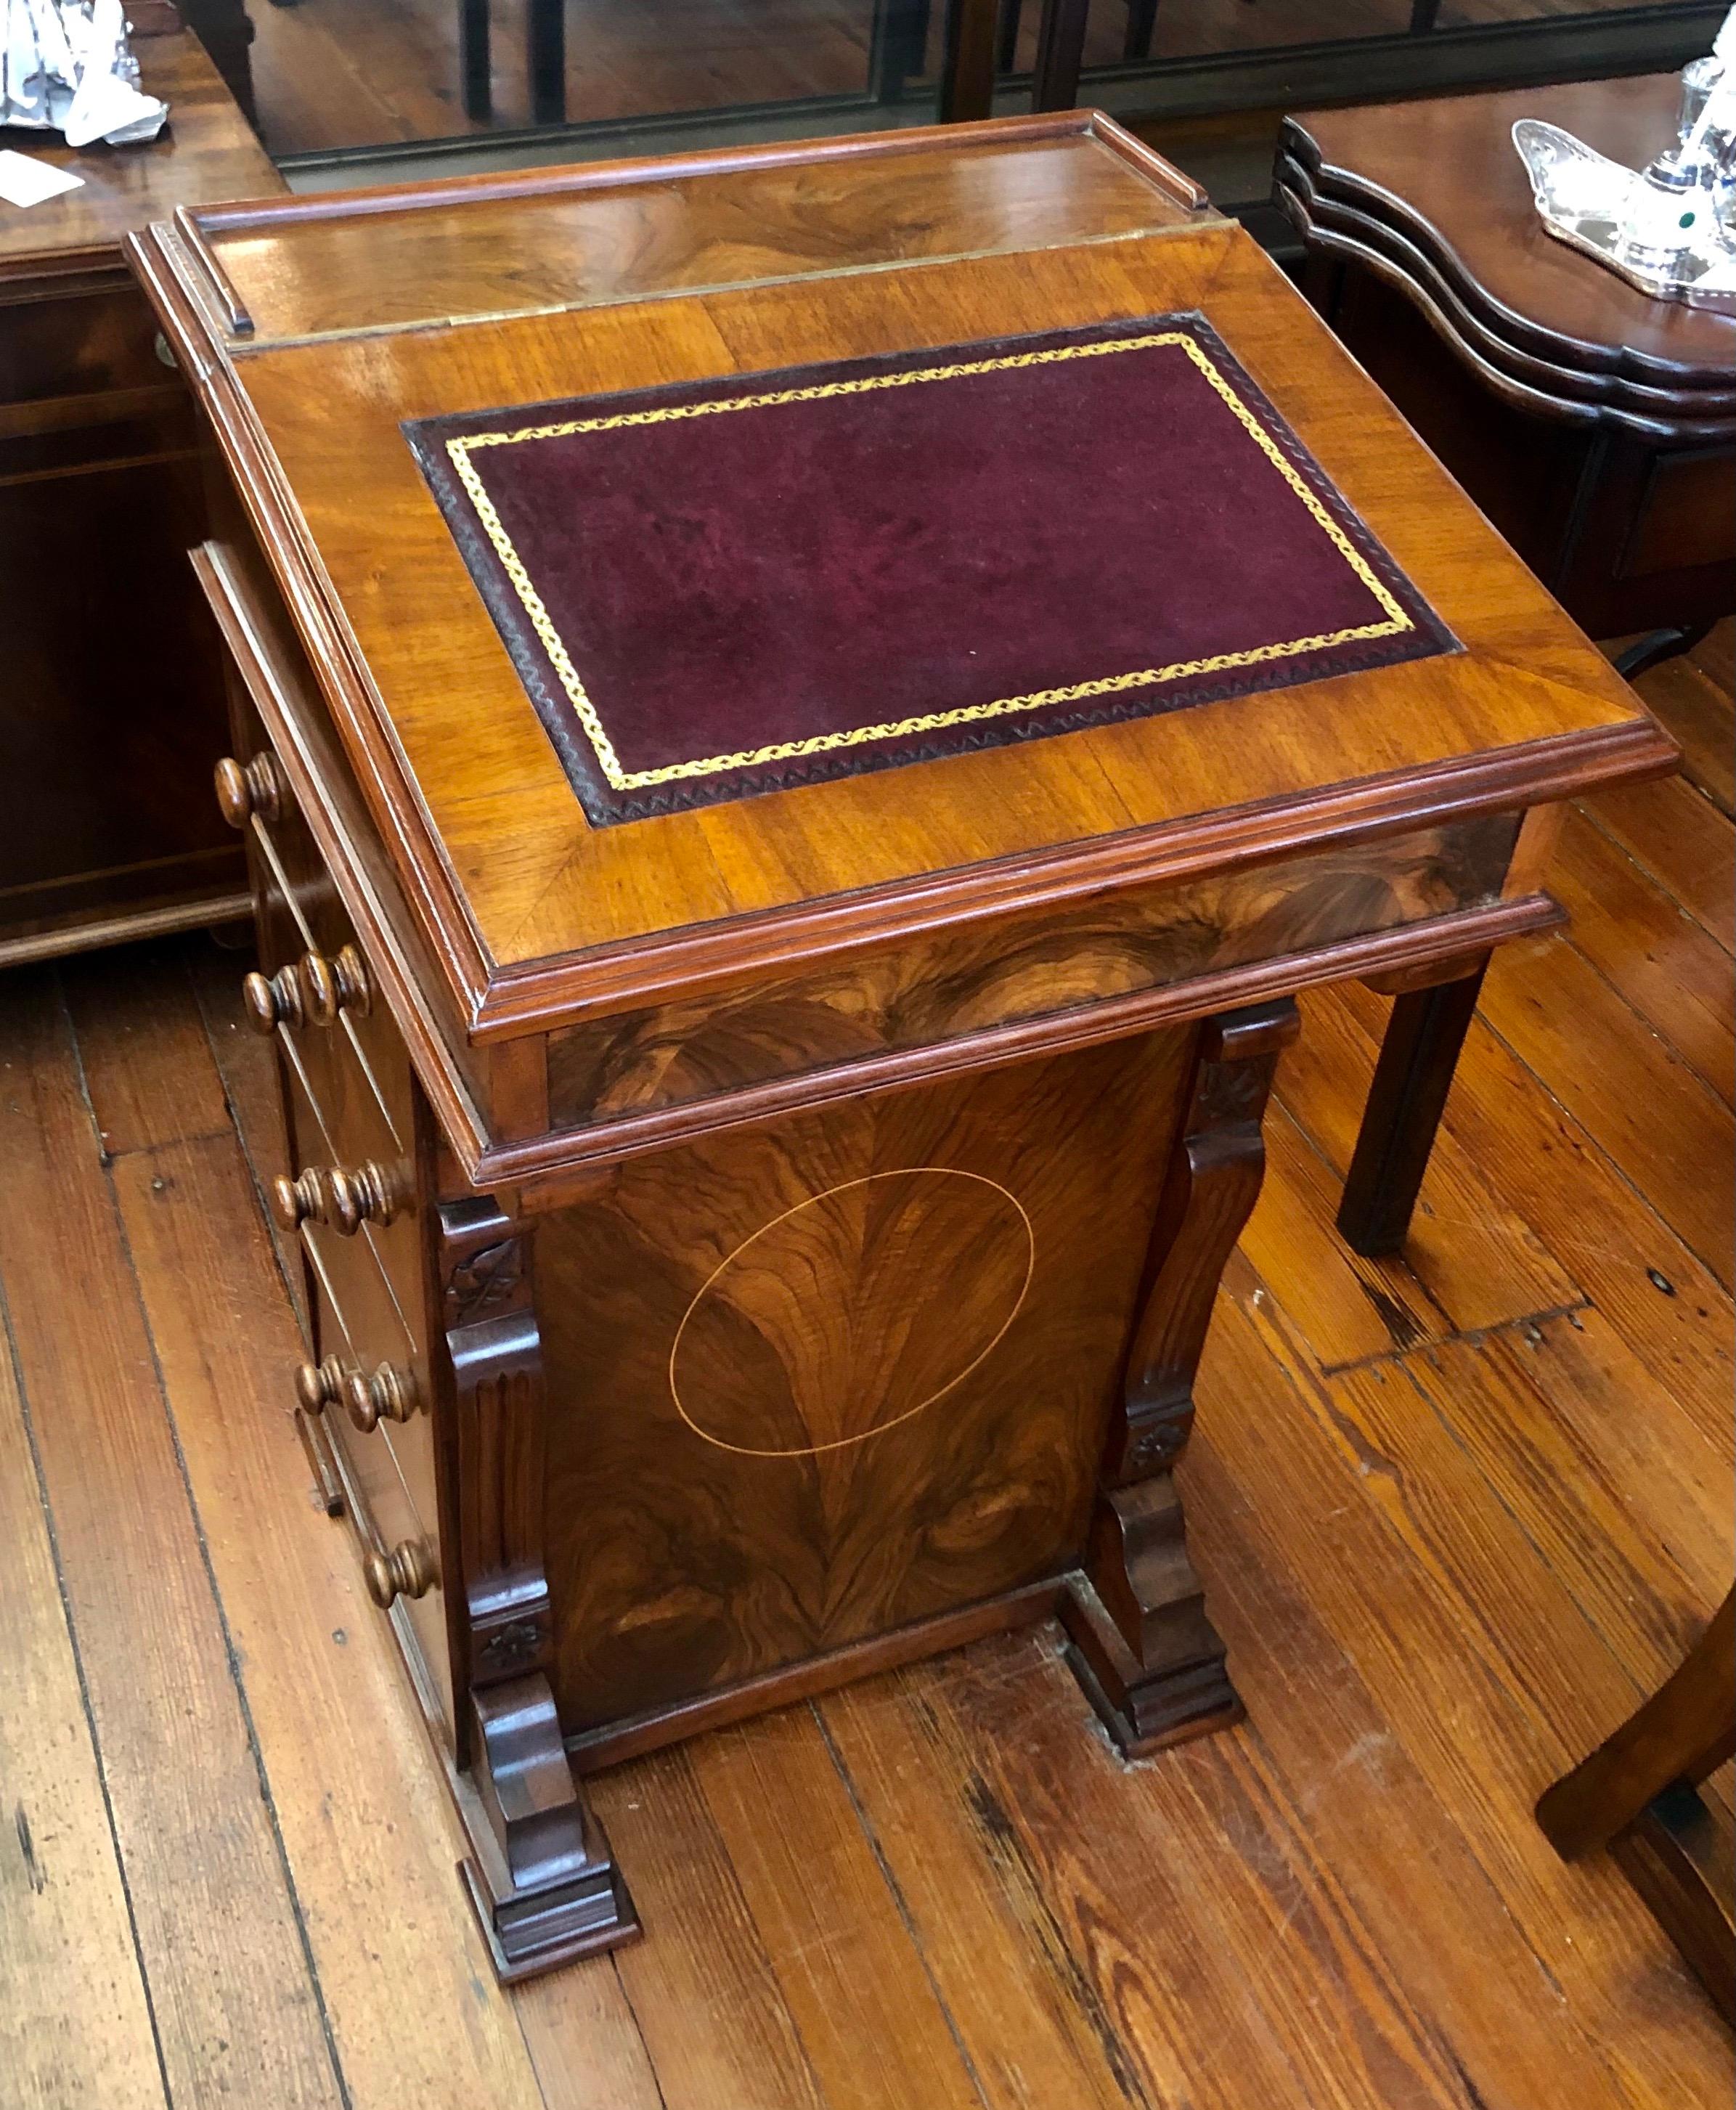 Embossed Antique English Inlaid Burr Walnut and Leather Davenport or Ship Captain’s Desk For Sale